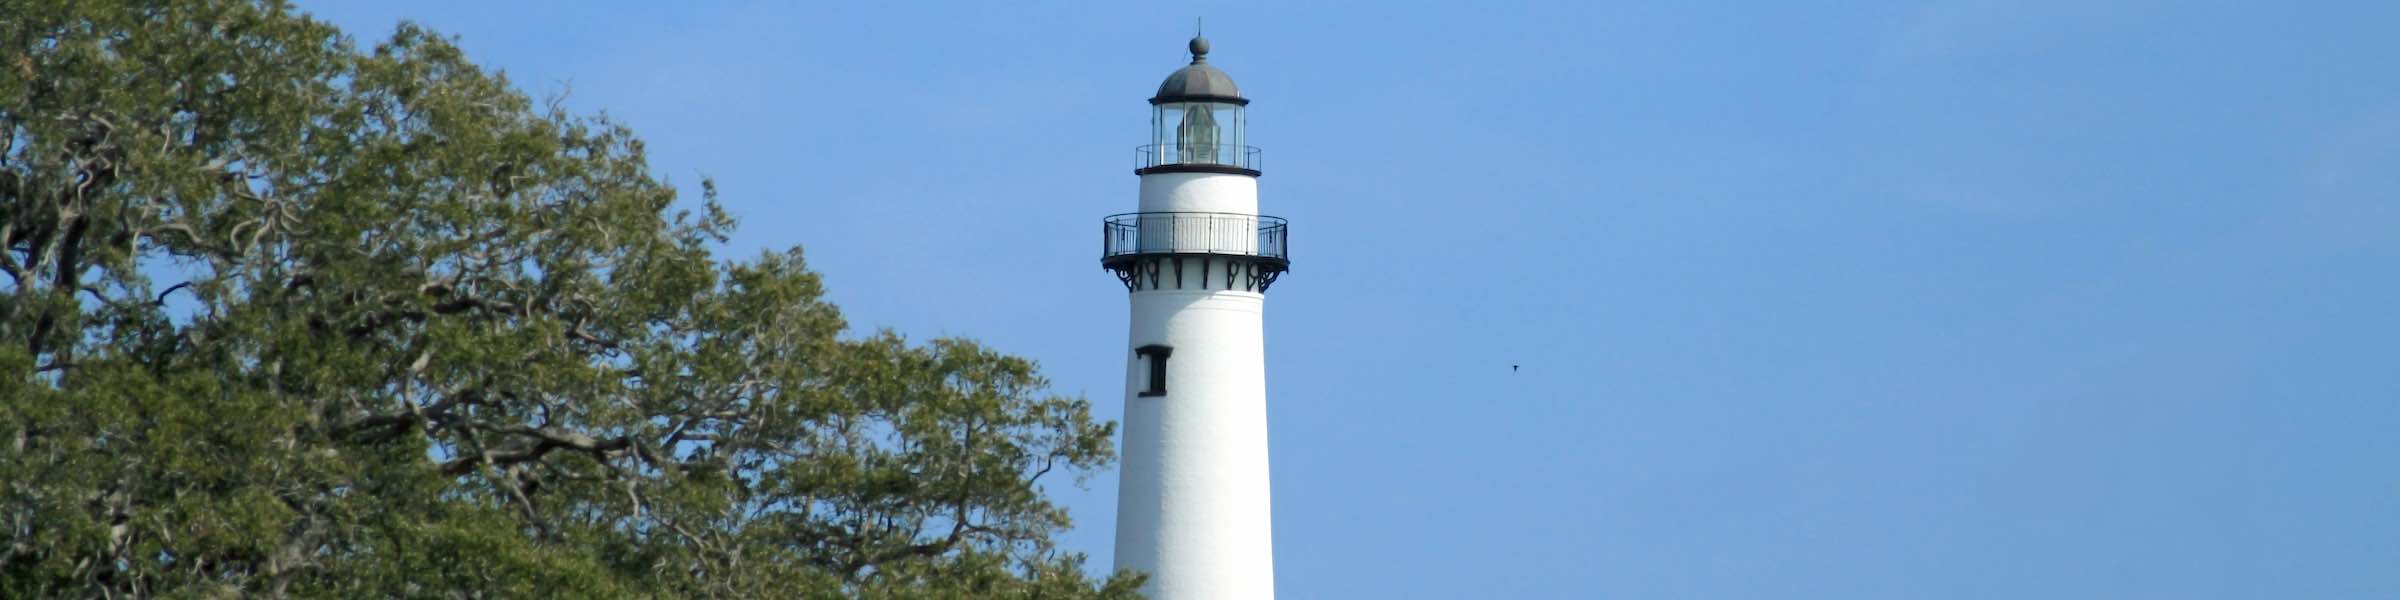 St Simons Island Lighthouse, behind a group of trees.